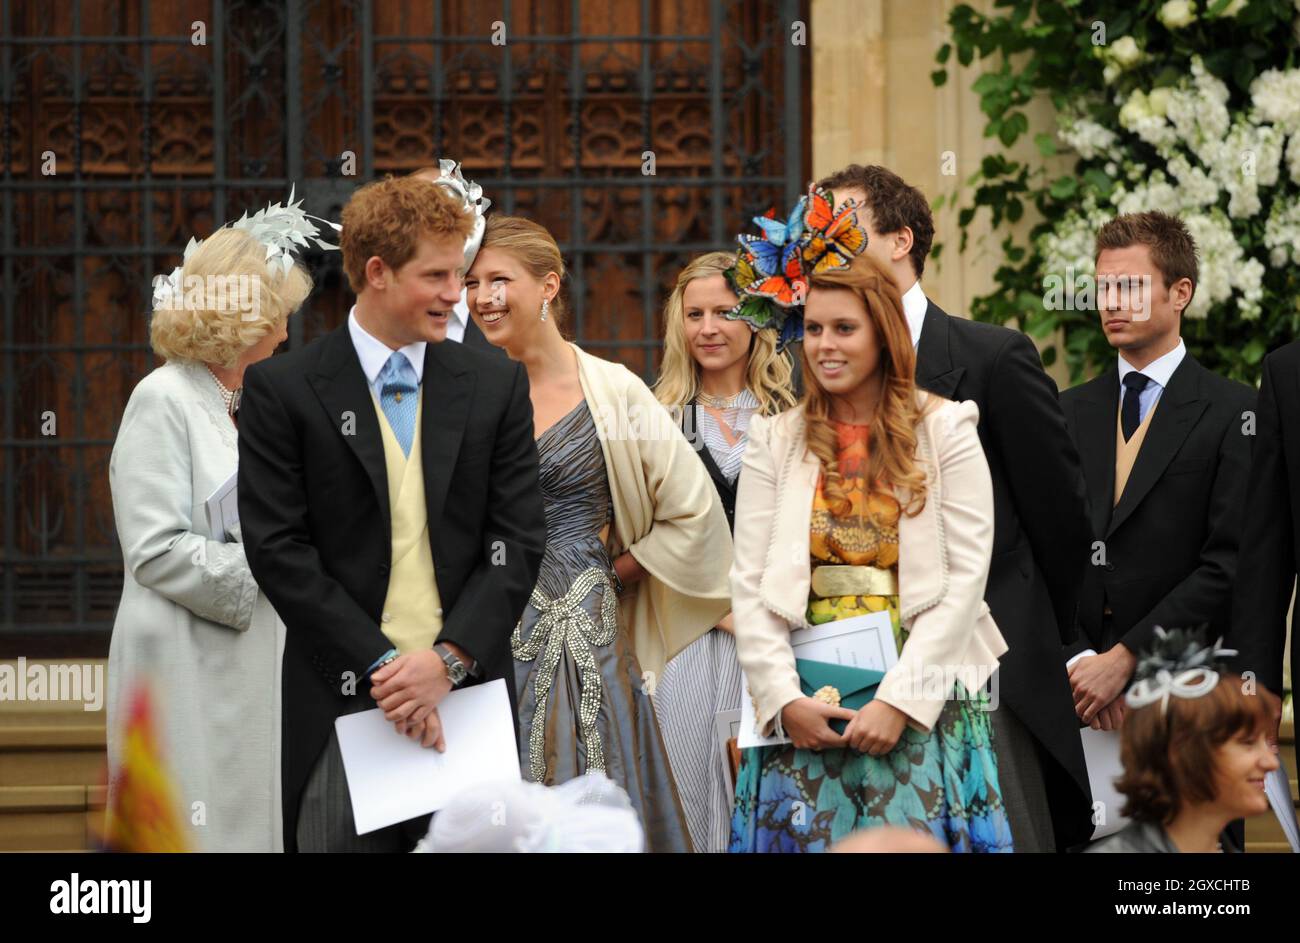 Prince Harry and Princess Beatrice leave St. George's Chapel after the marriage ceremony of Peter Phillips and Autumn Kelly at Windor Castle, Windsor. Stock Photo